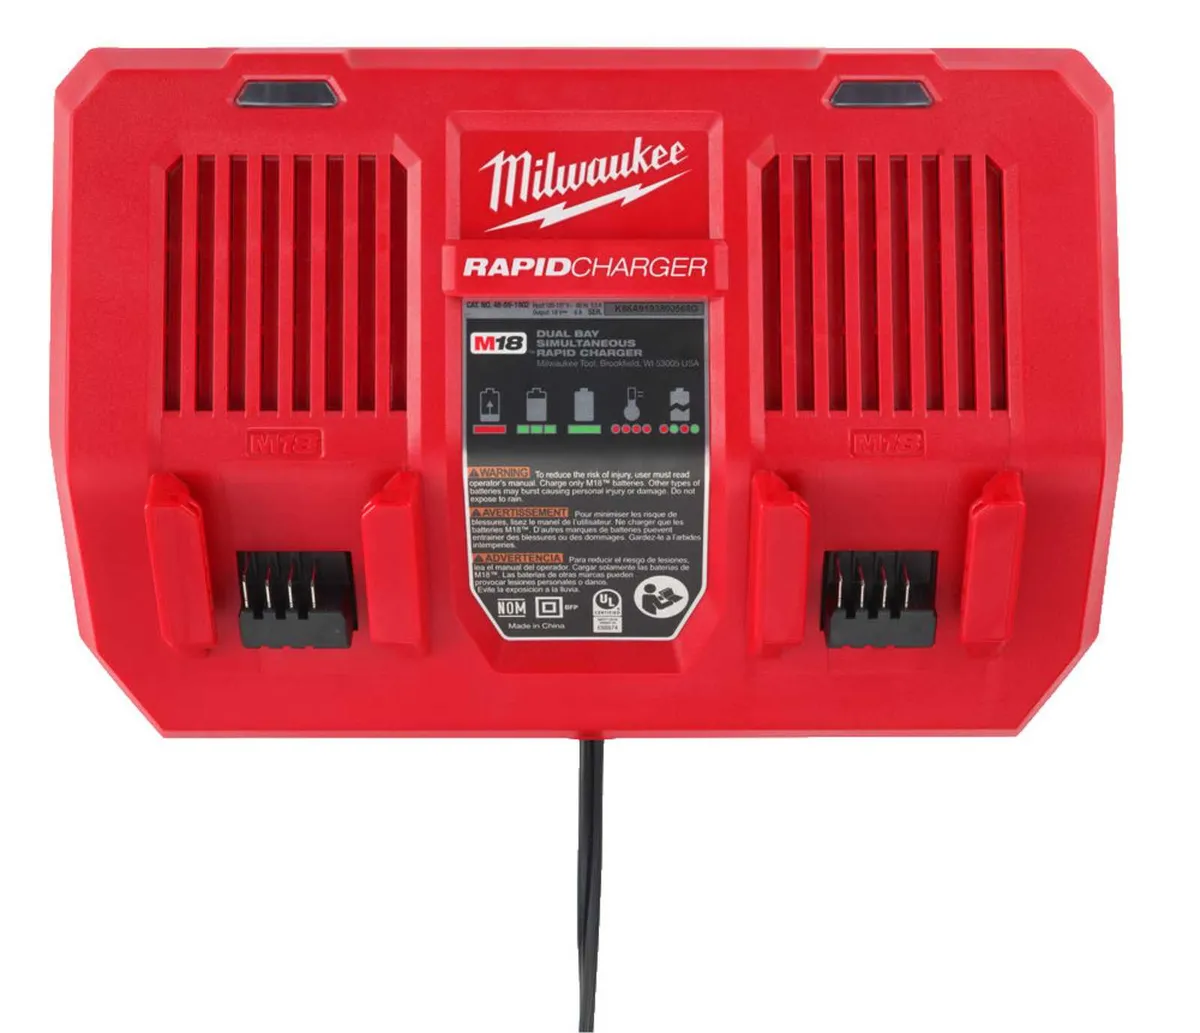 Milwaukee M18_DFC Duel Bay Rapid Charger - Image 1